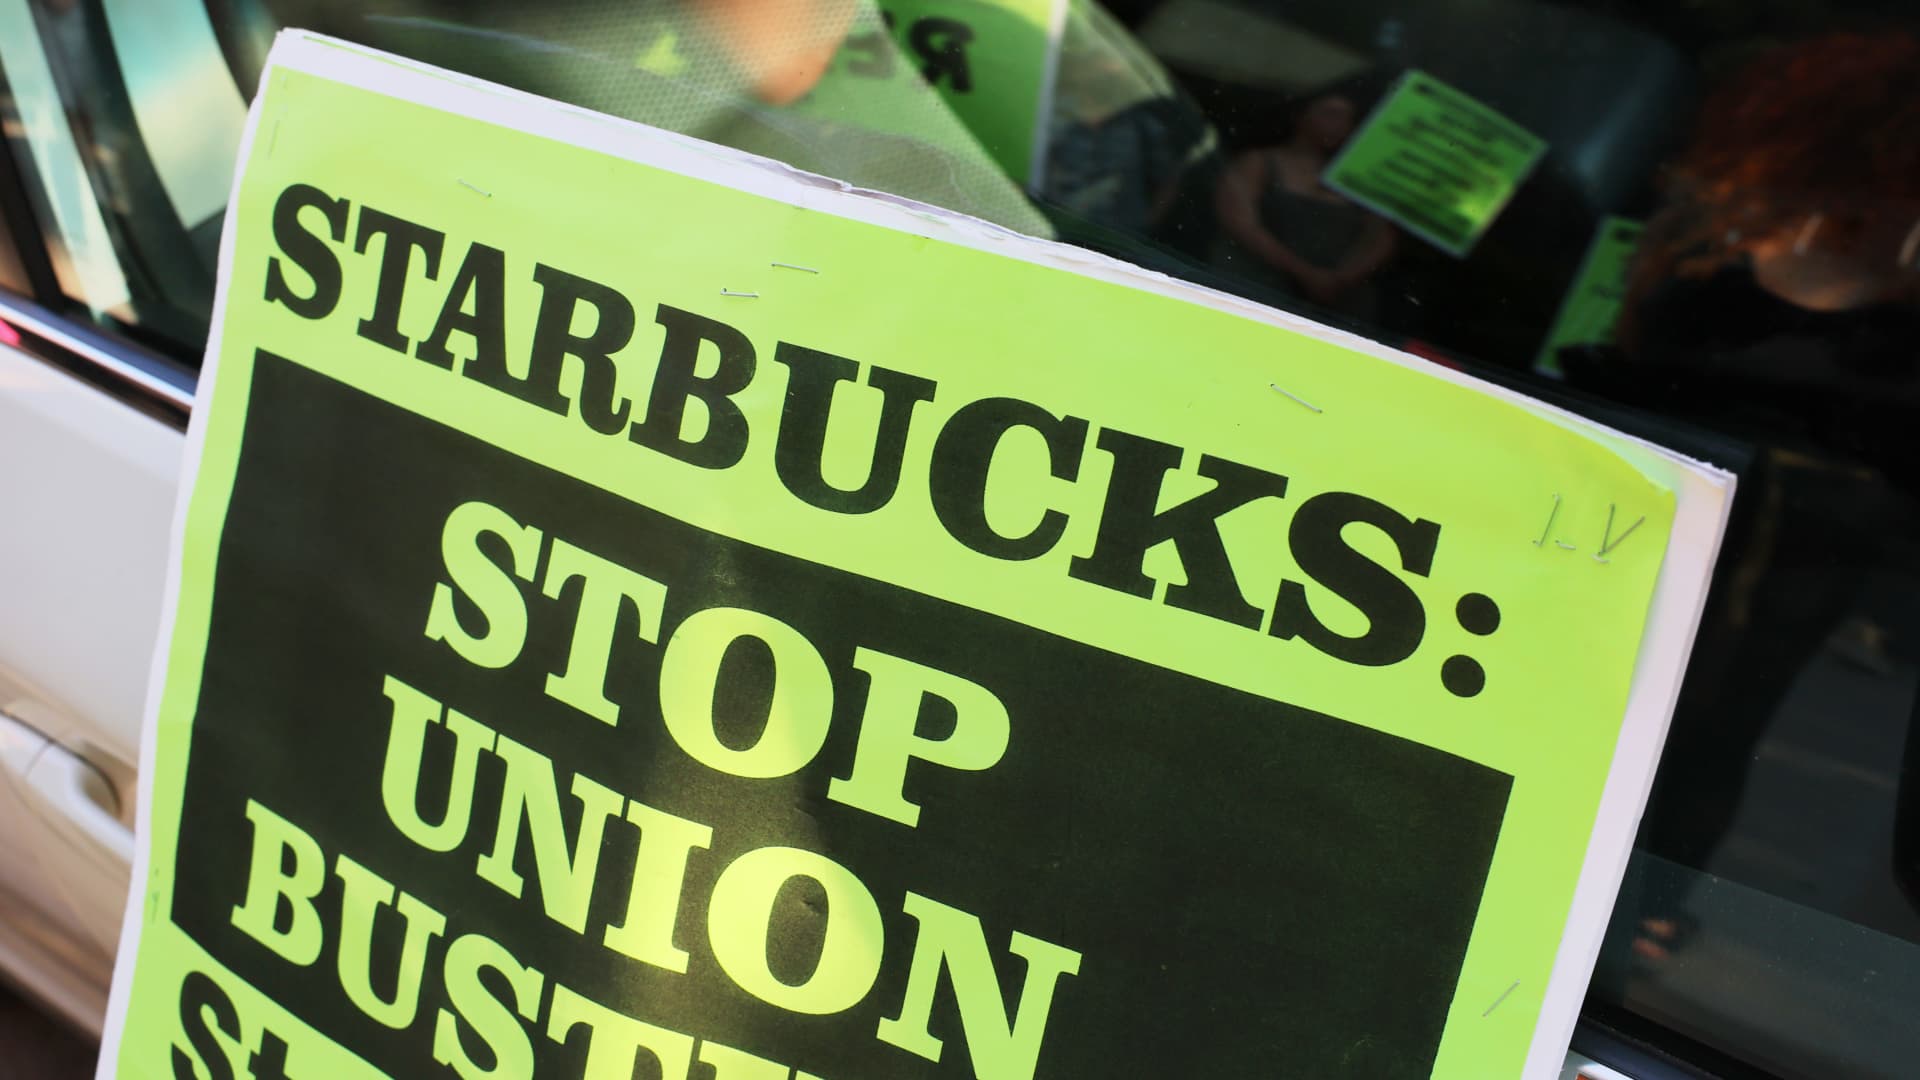 Starbucks asks labor board to suspend mail-in ballot union elections, alleging misconduct in voting process - CNBC : Starbucks is asking the federal labor board to suspend all main-in ballot union elections nationwide.  | Tranquility 國際社群